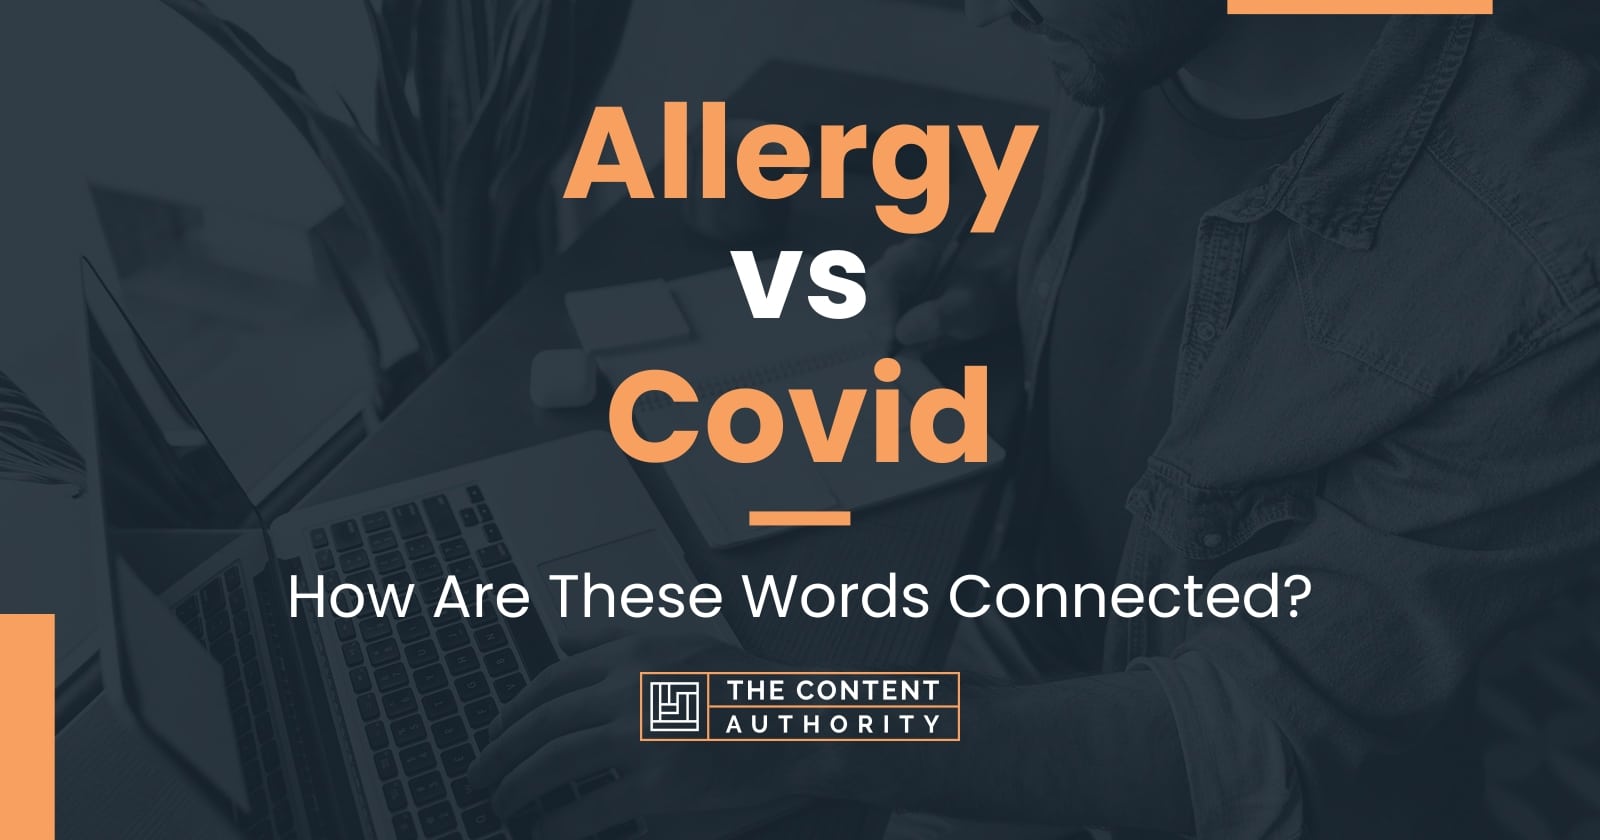 Allergy vs Covid: How Are These Words Connected?